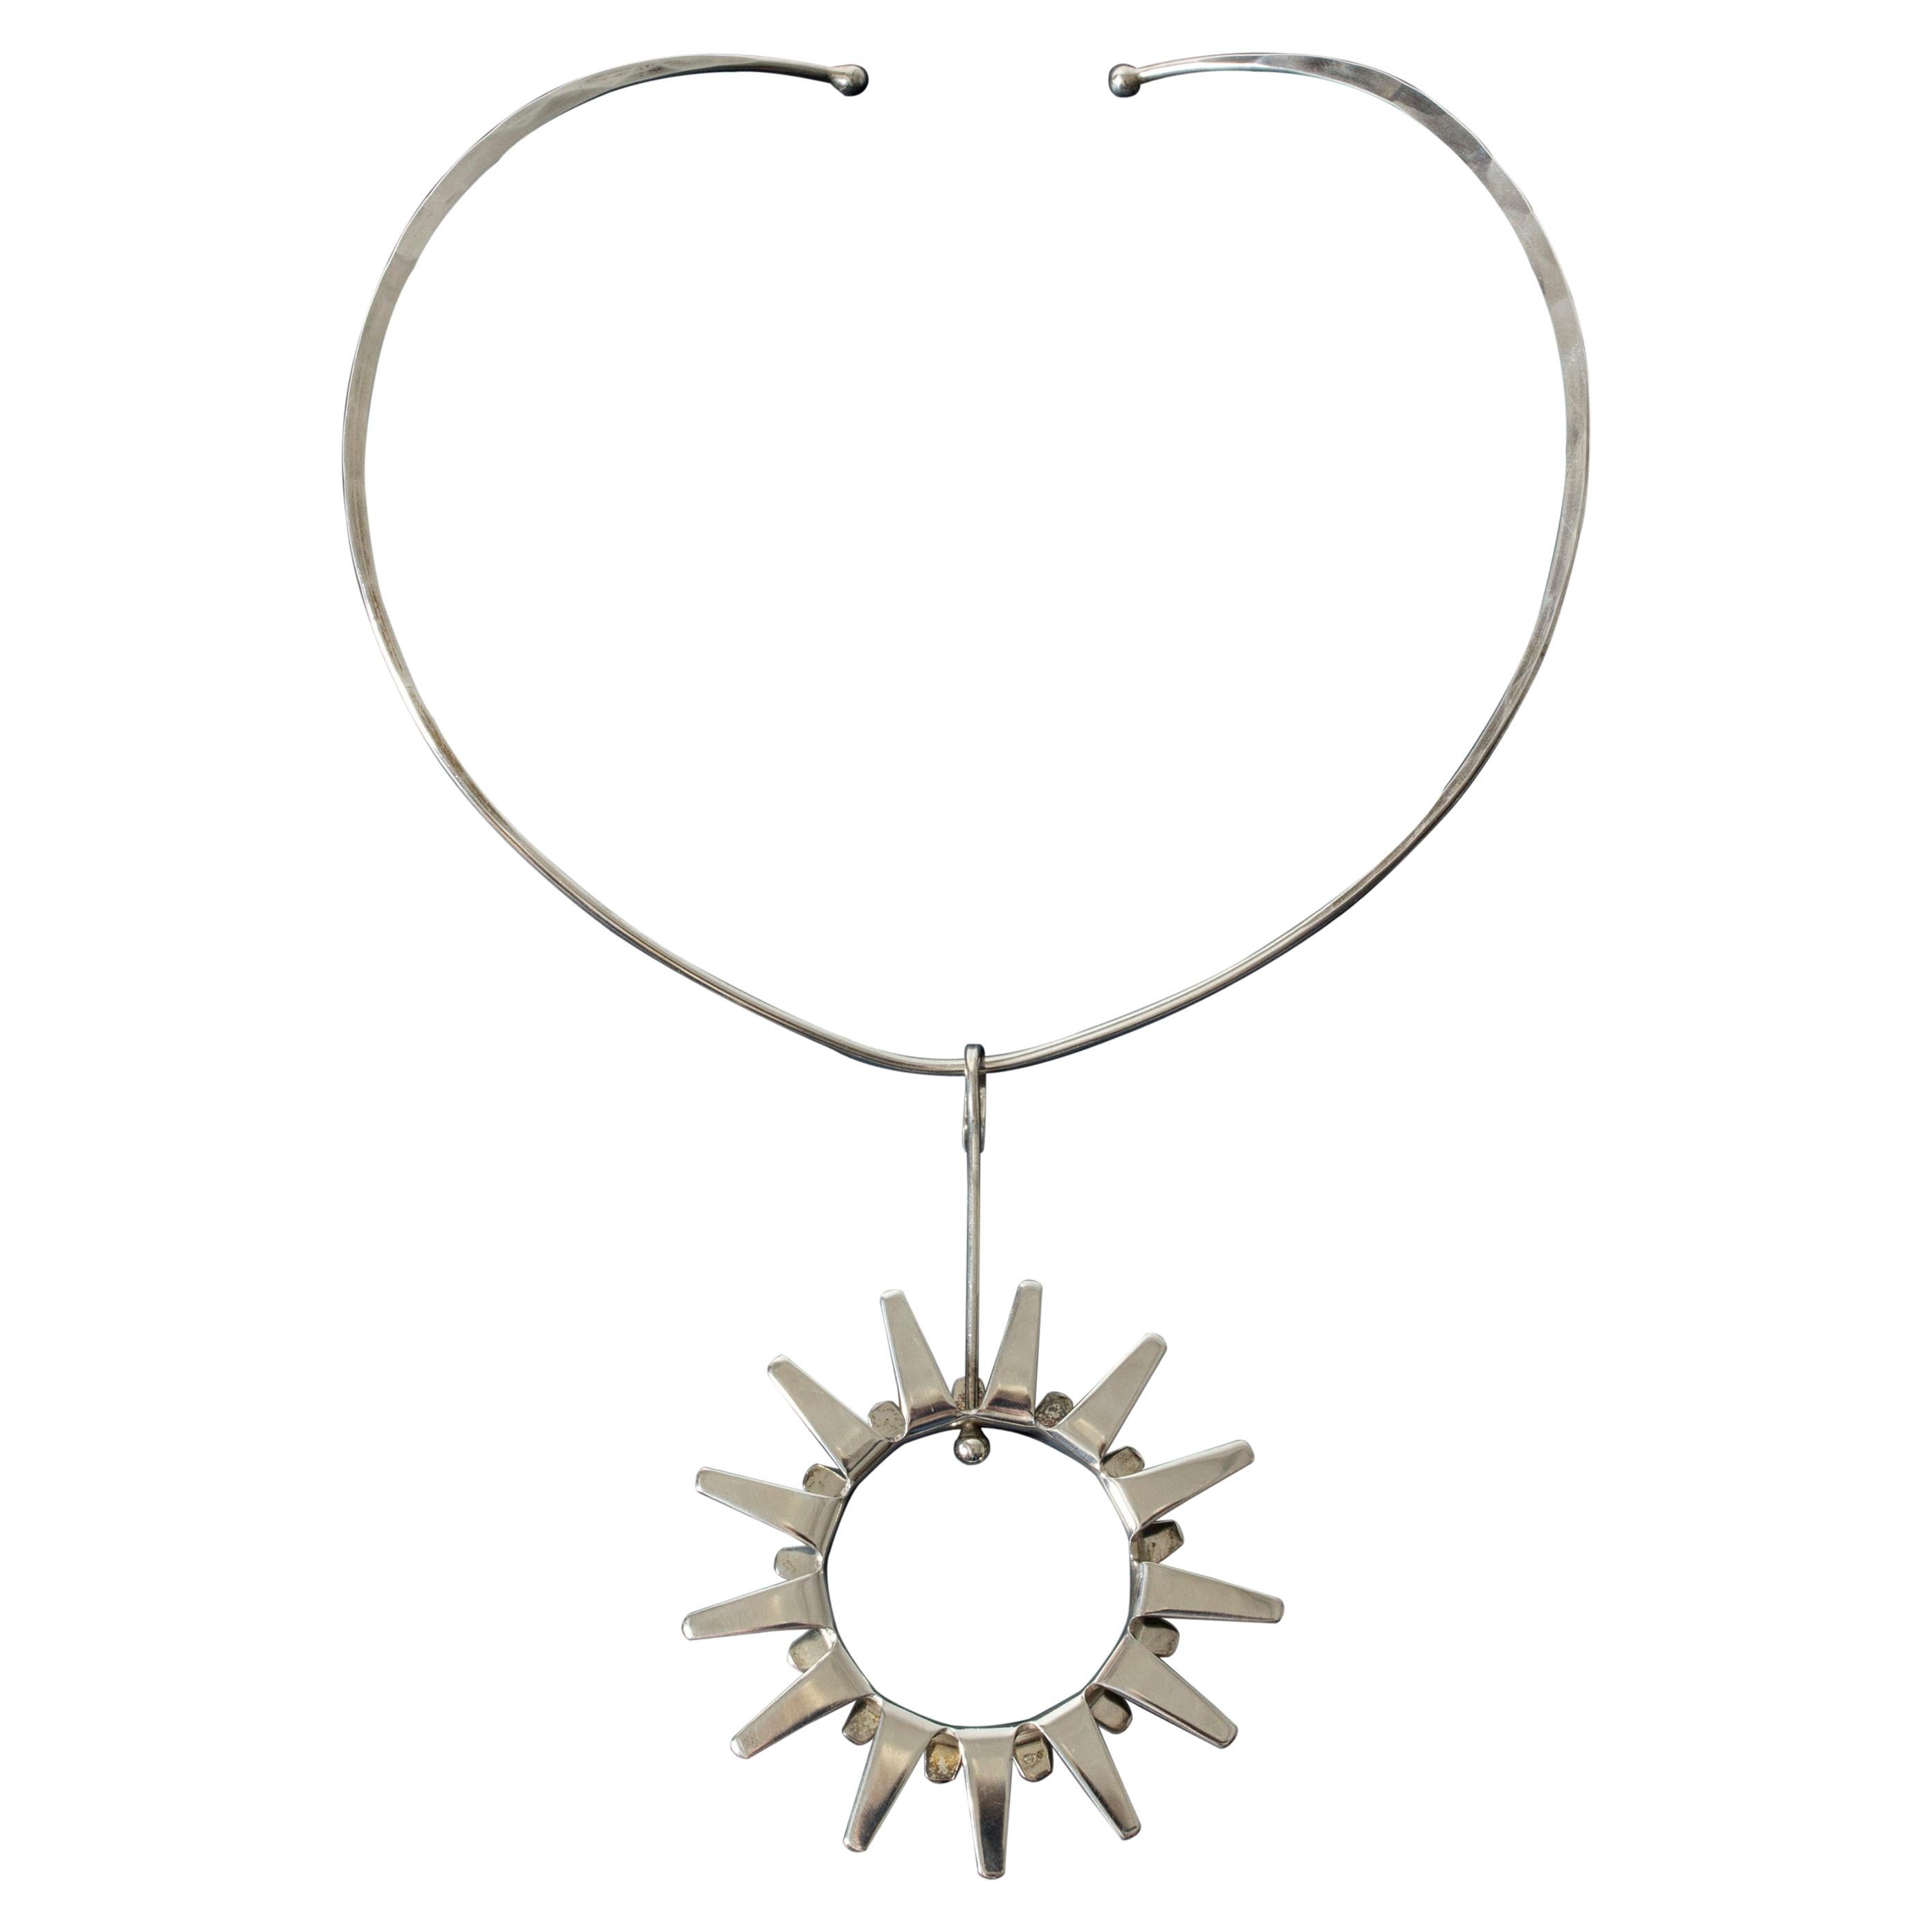 Silver Pendant Collier by Tone Vigeland for Plus, Norway, 1950s